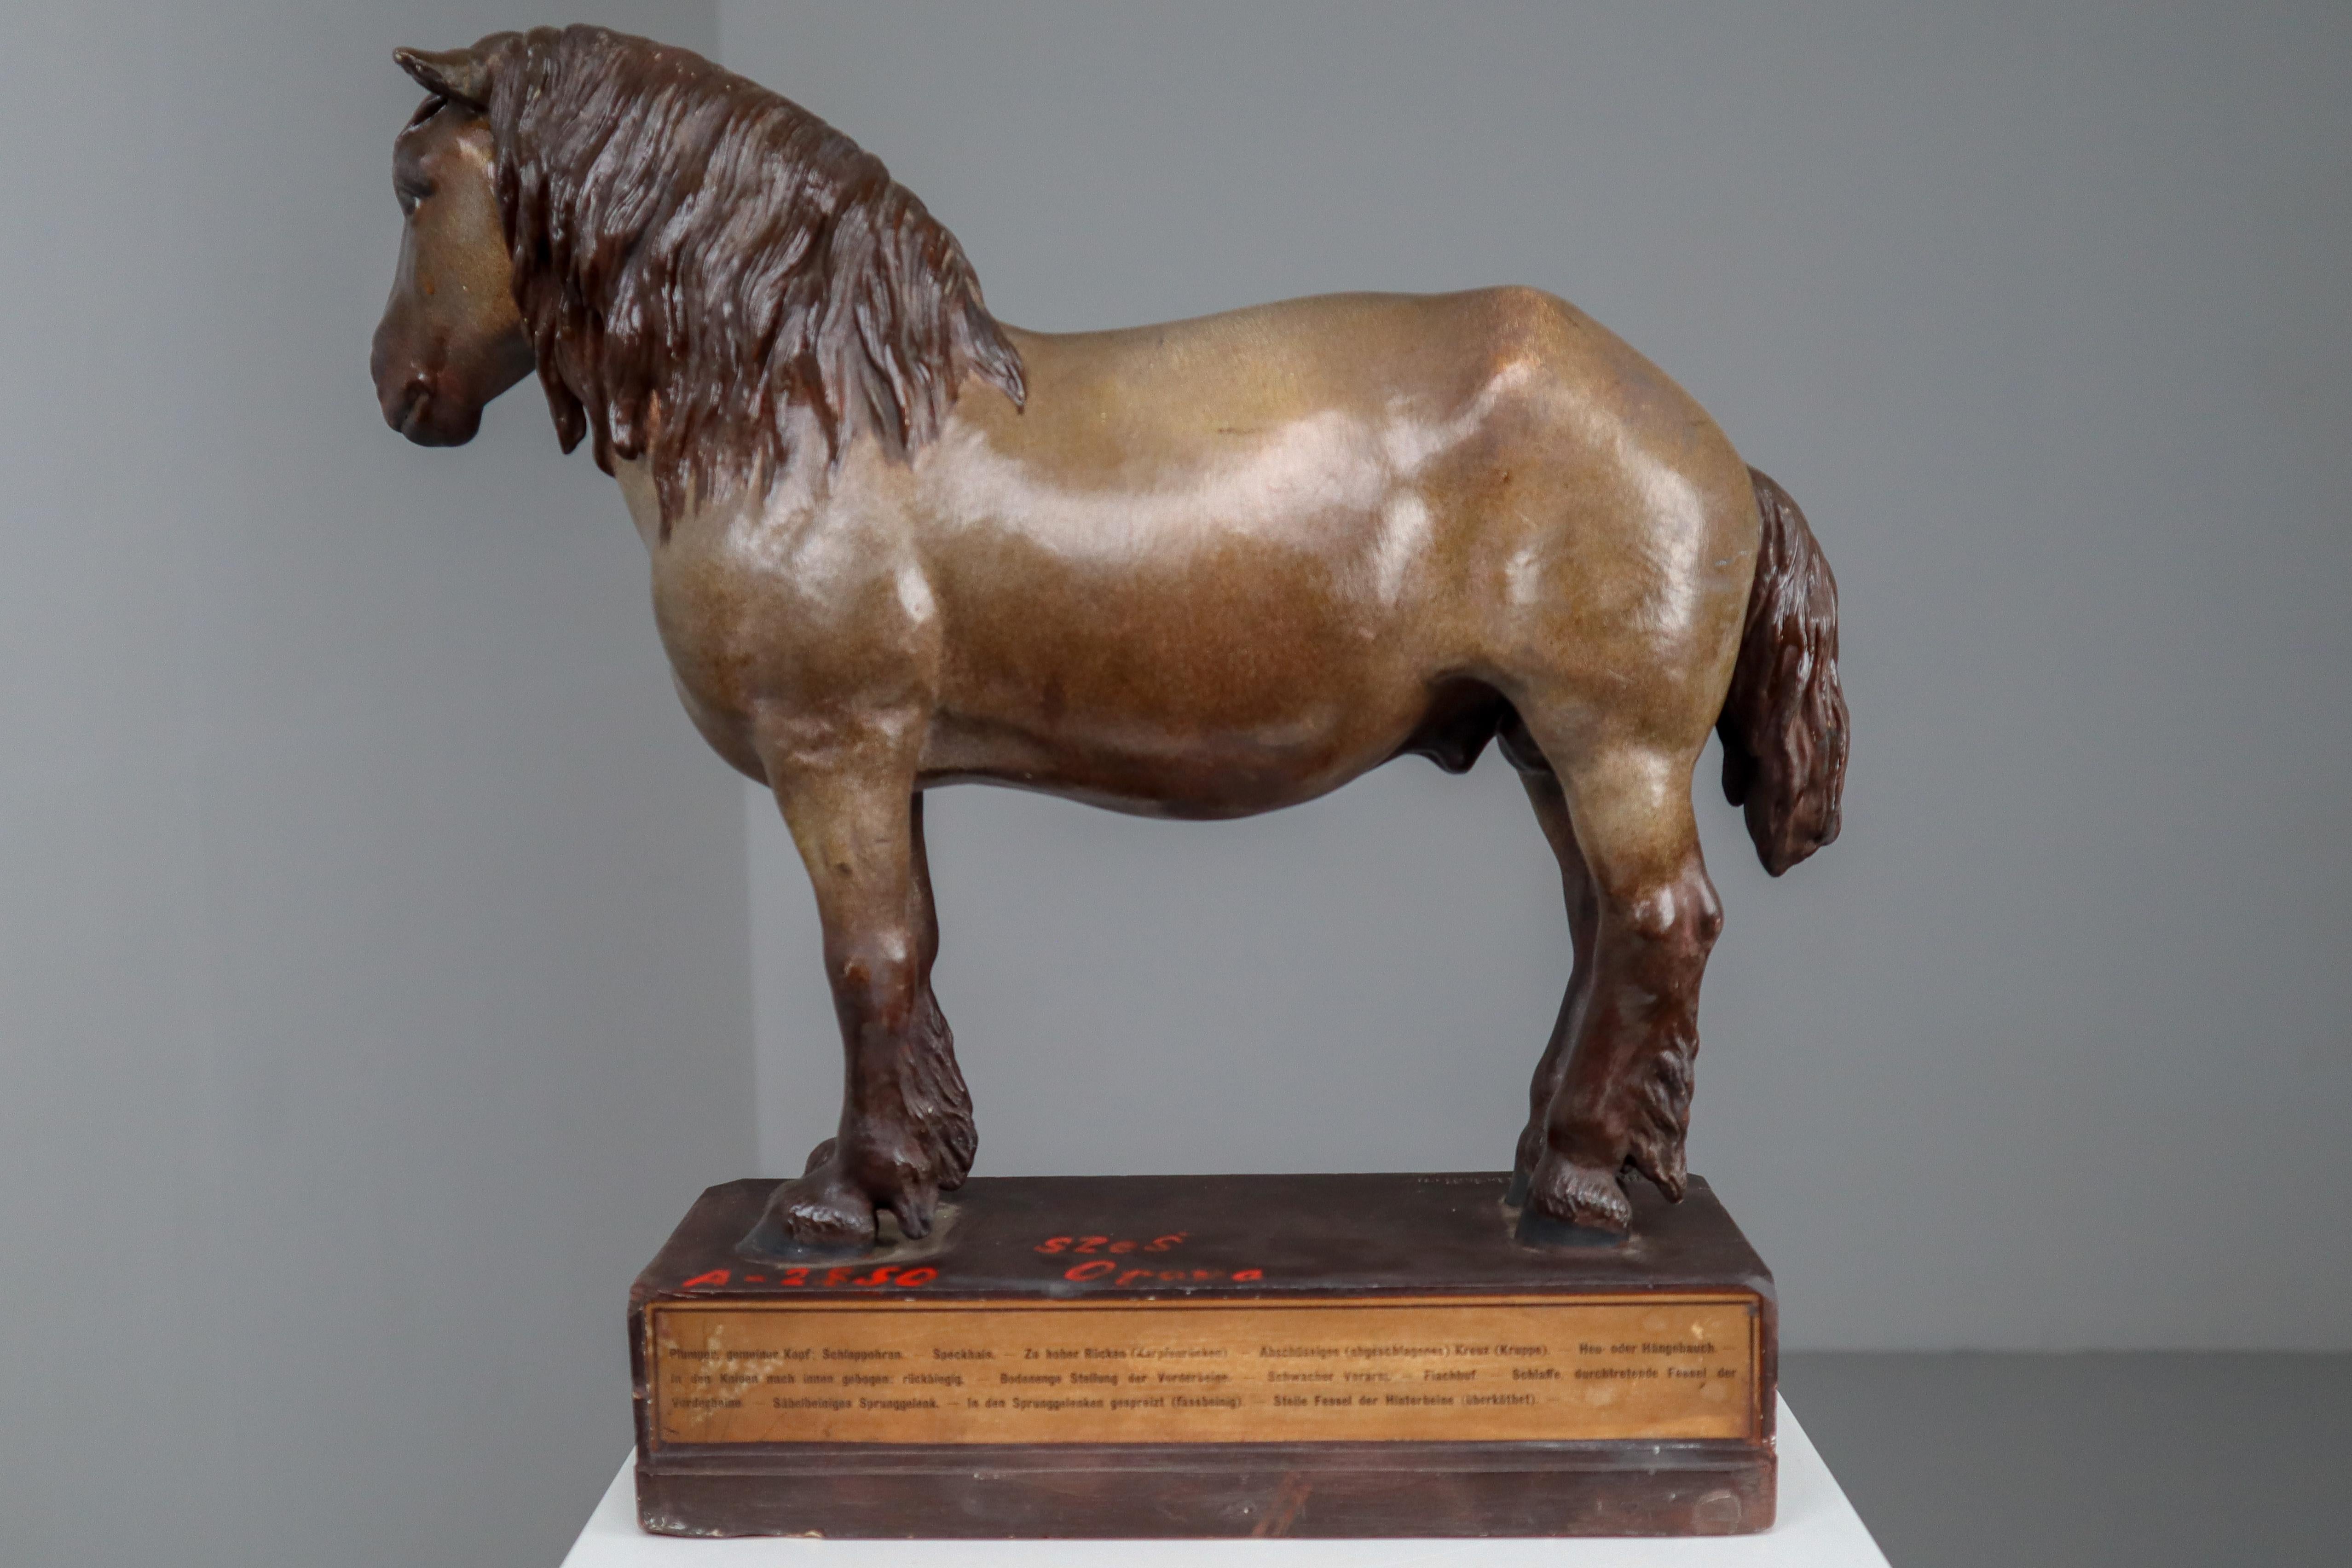 Cold Blood Horse Model in Painted Plaster by Max Landsberg, Berlin 1885 3